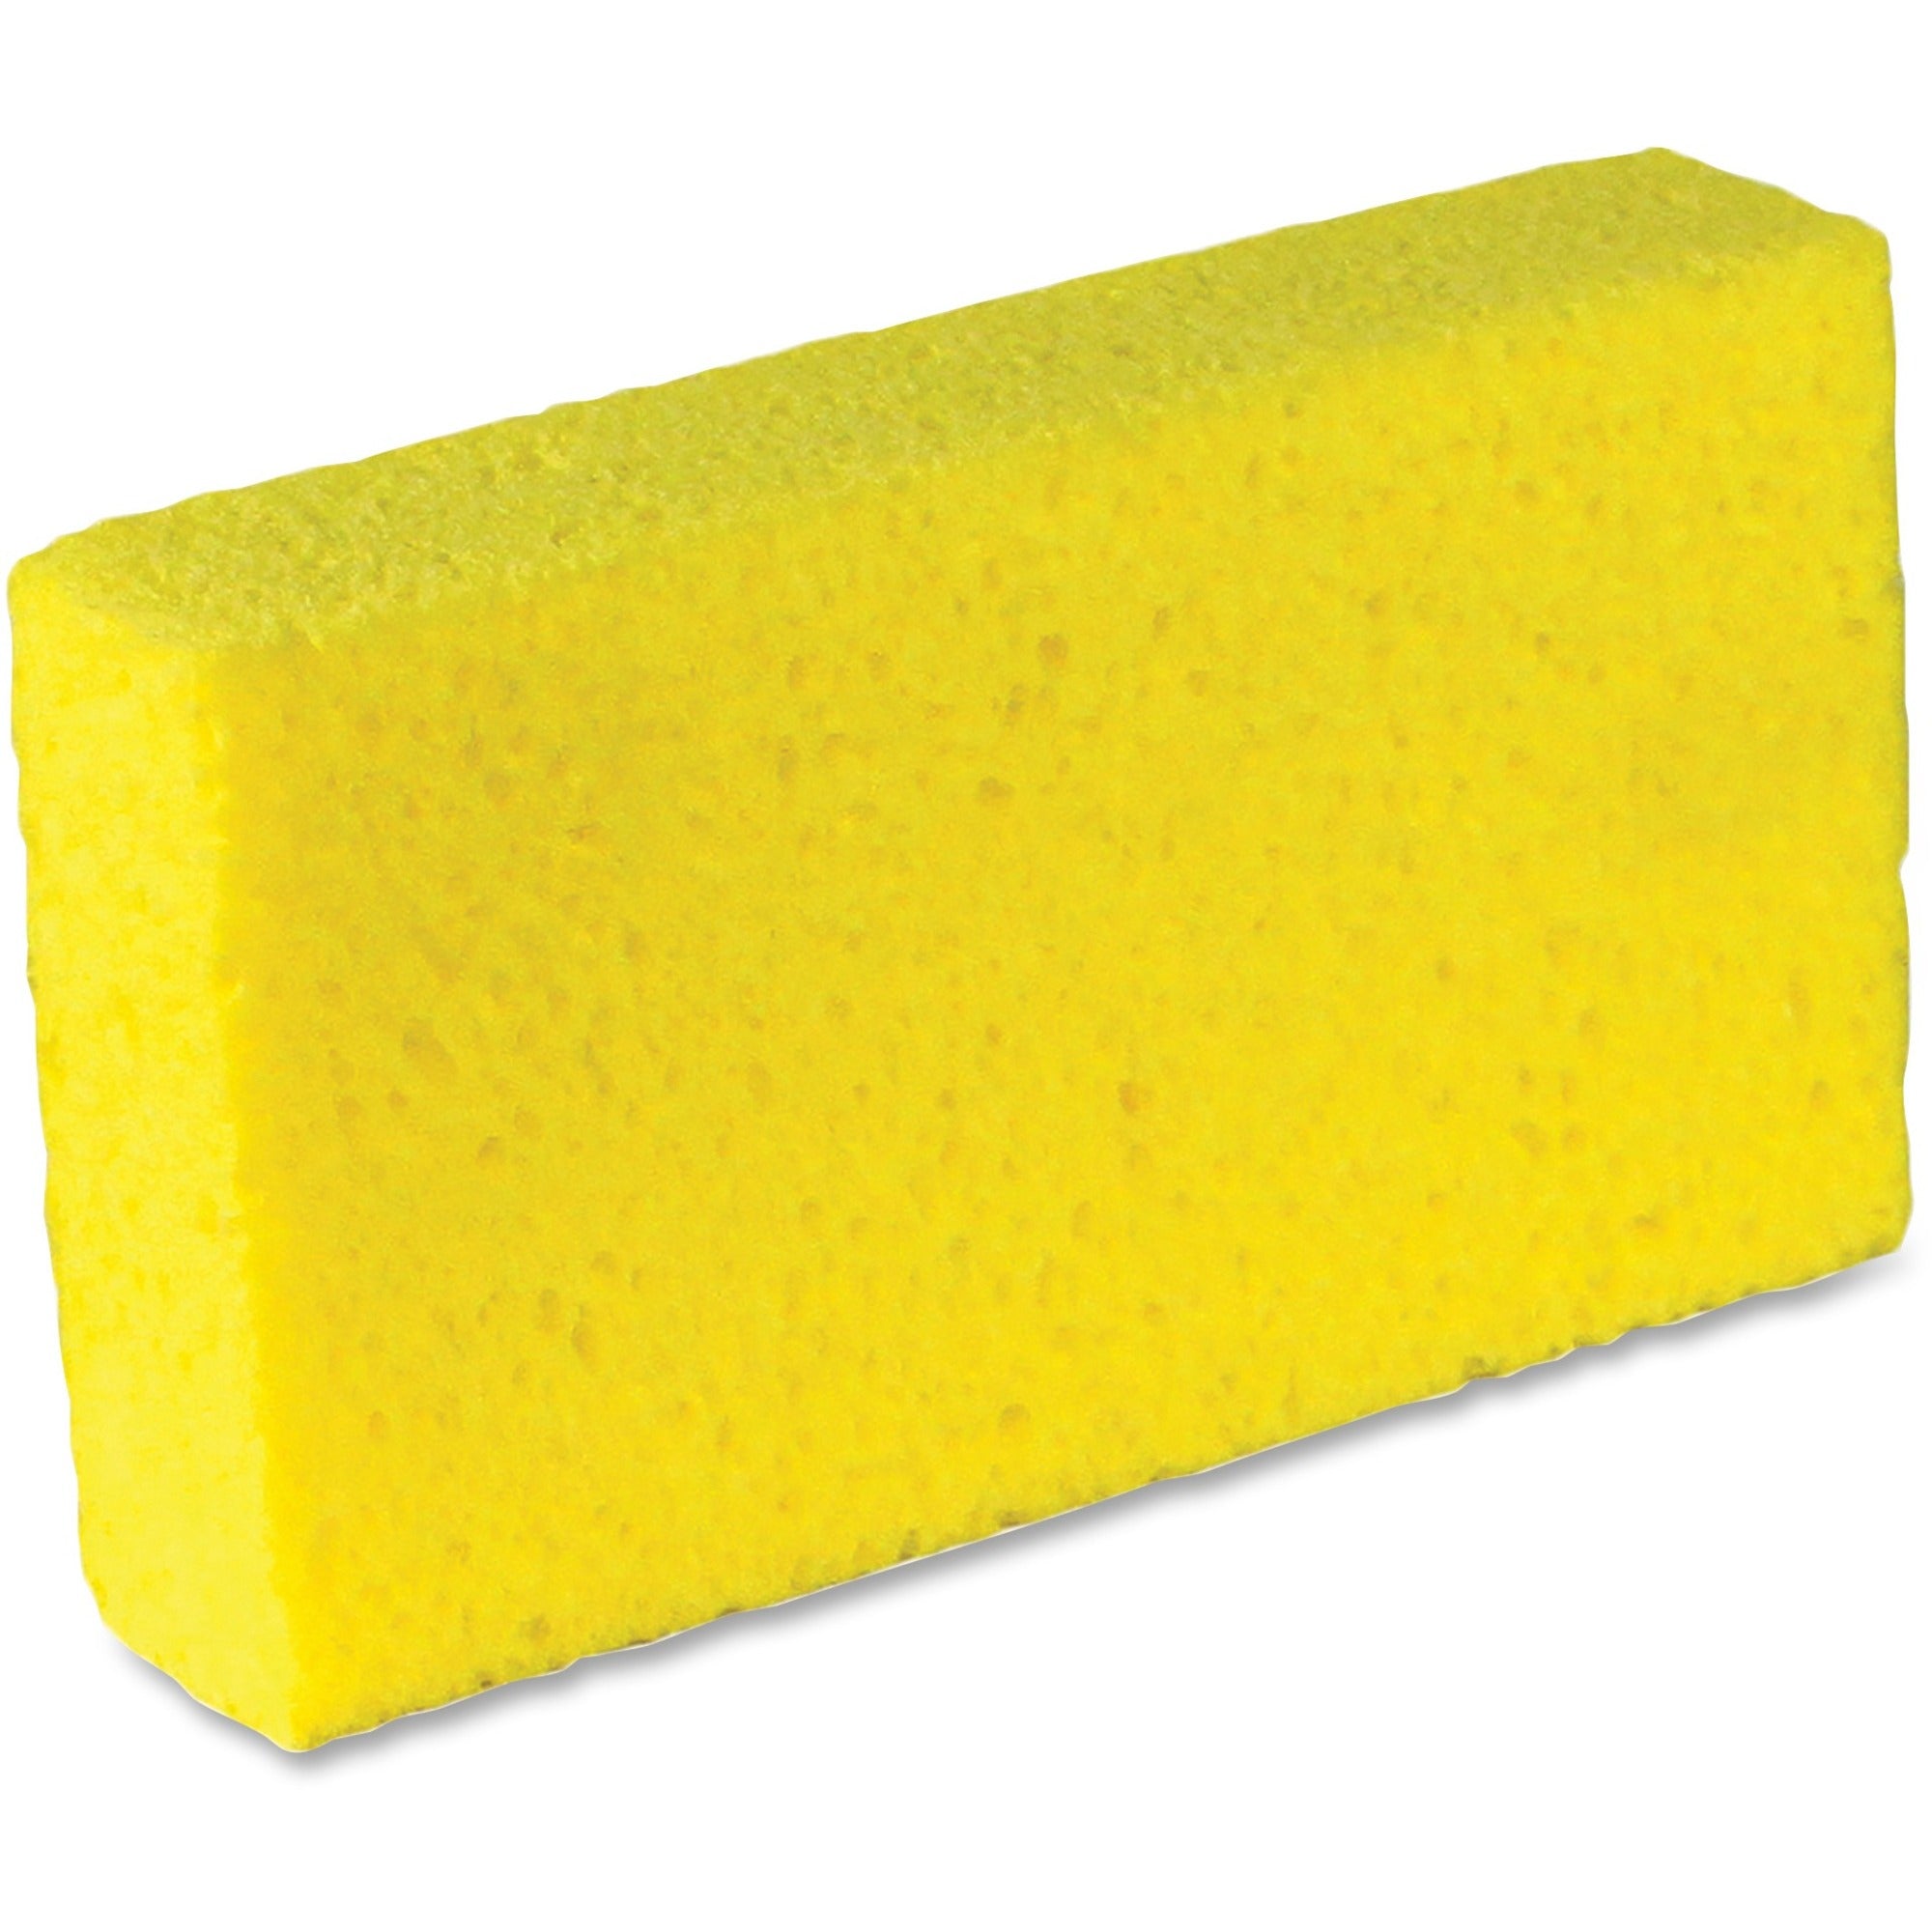 Impact Large Cellulose Sponges - 1.7" Height x 4.2" Width x 7.5" Length - 24/Carton - Cellulose - Yellow